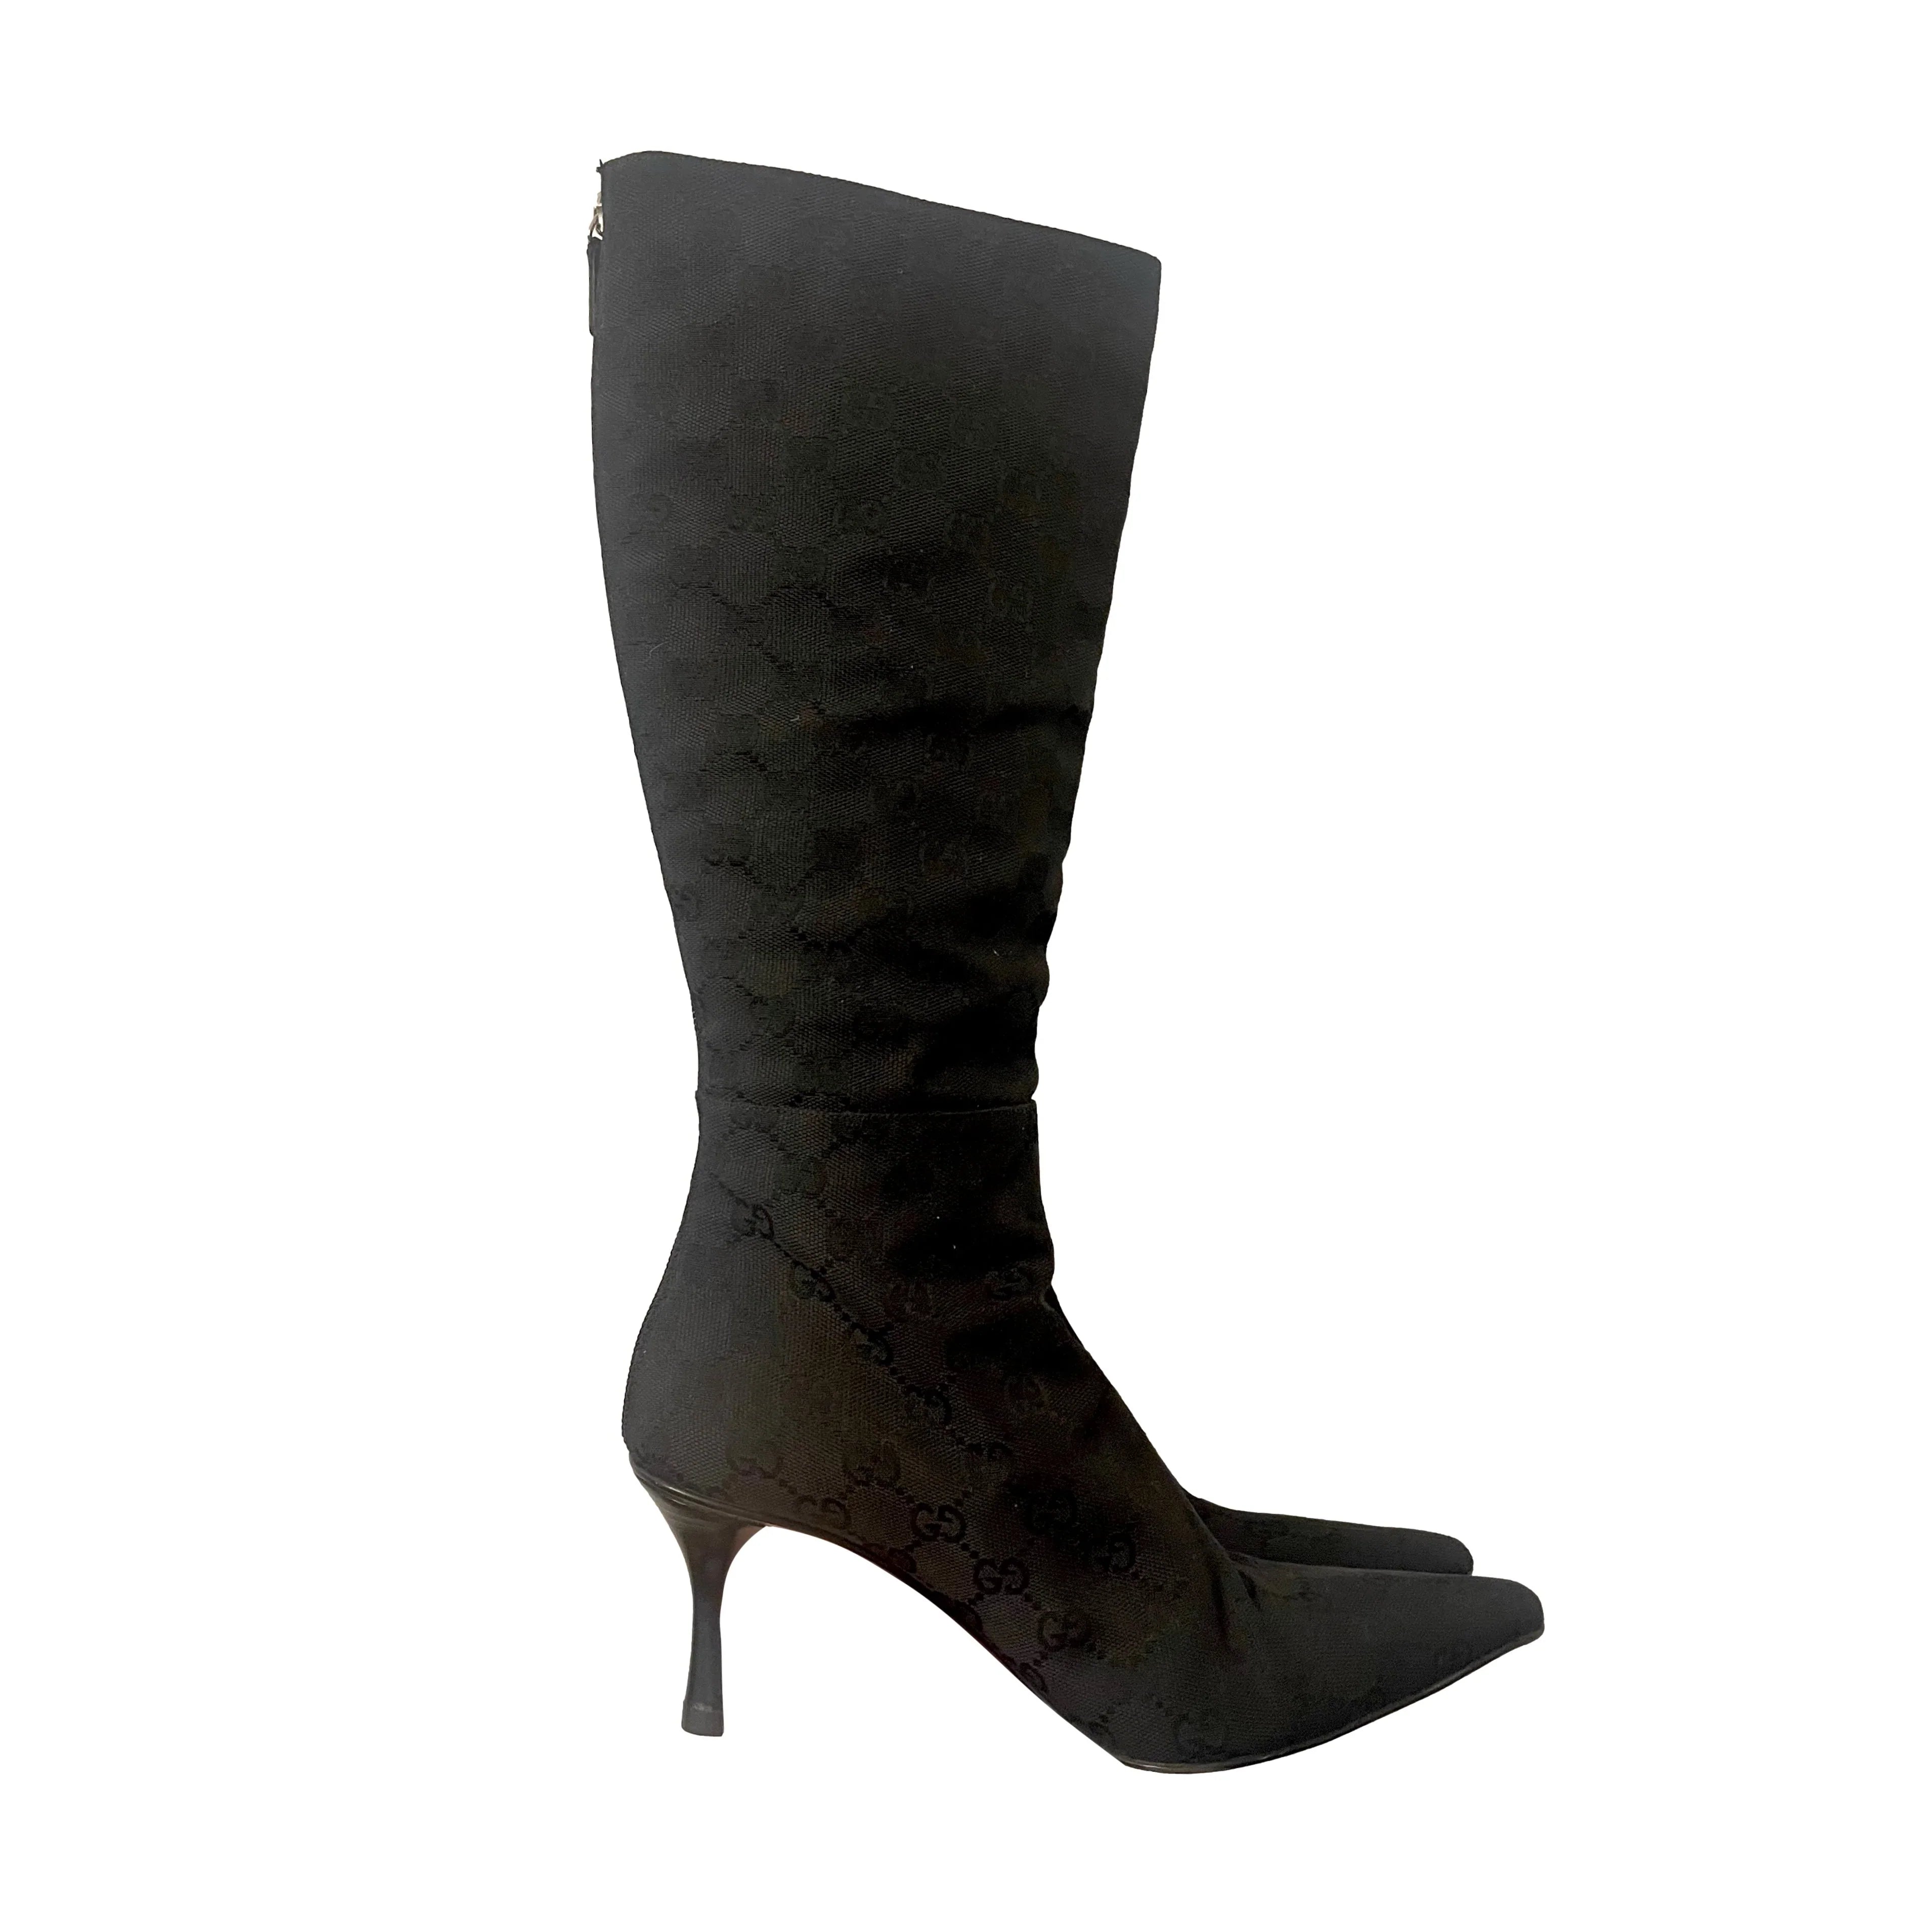 Gucci Monogram Over the Knee Boots - dress. Raleigh